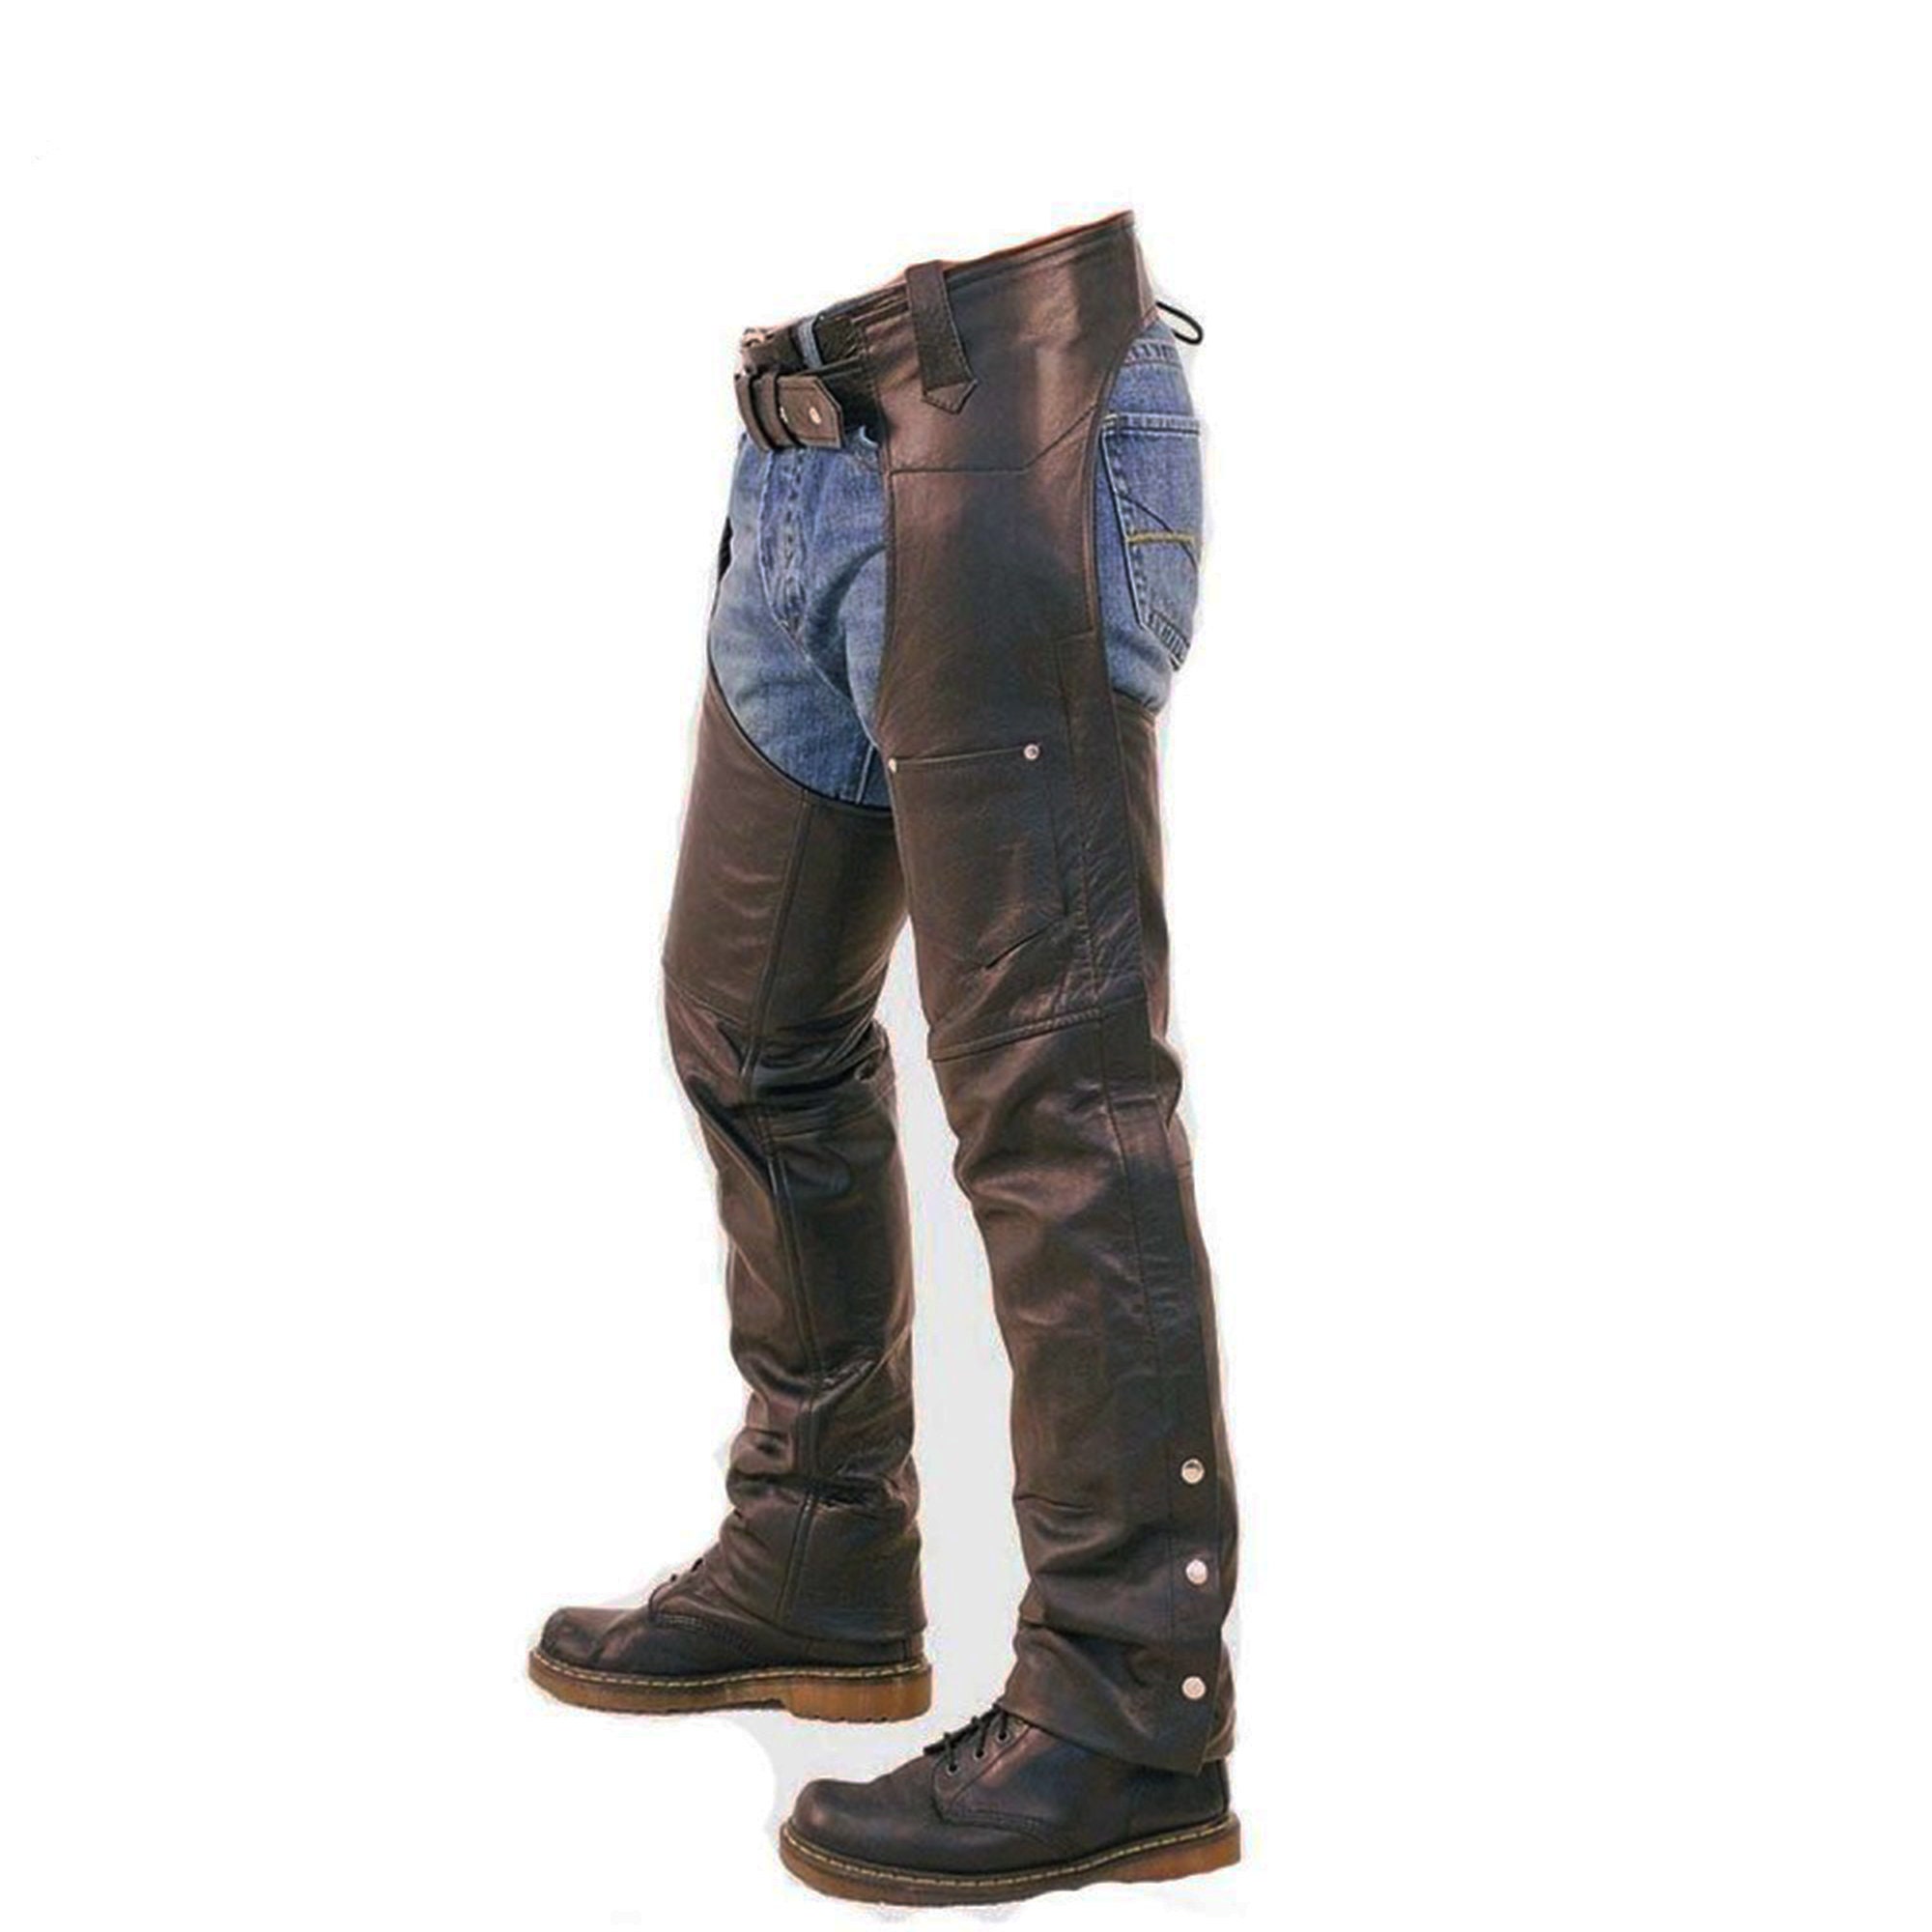 Buy Chaps for Men Leather Chaps for Men Assless Chaps Chaps Online in India   Etsy